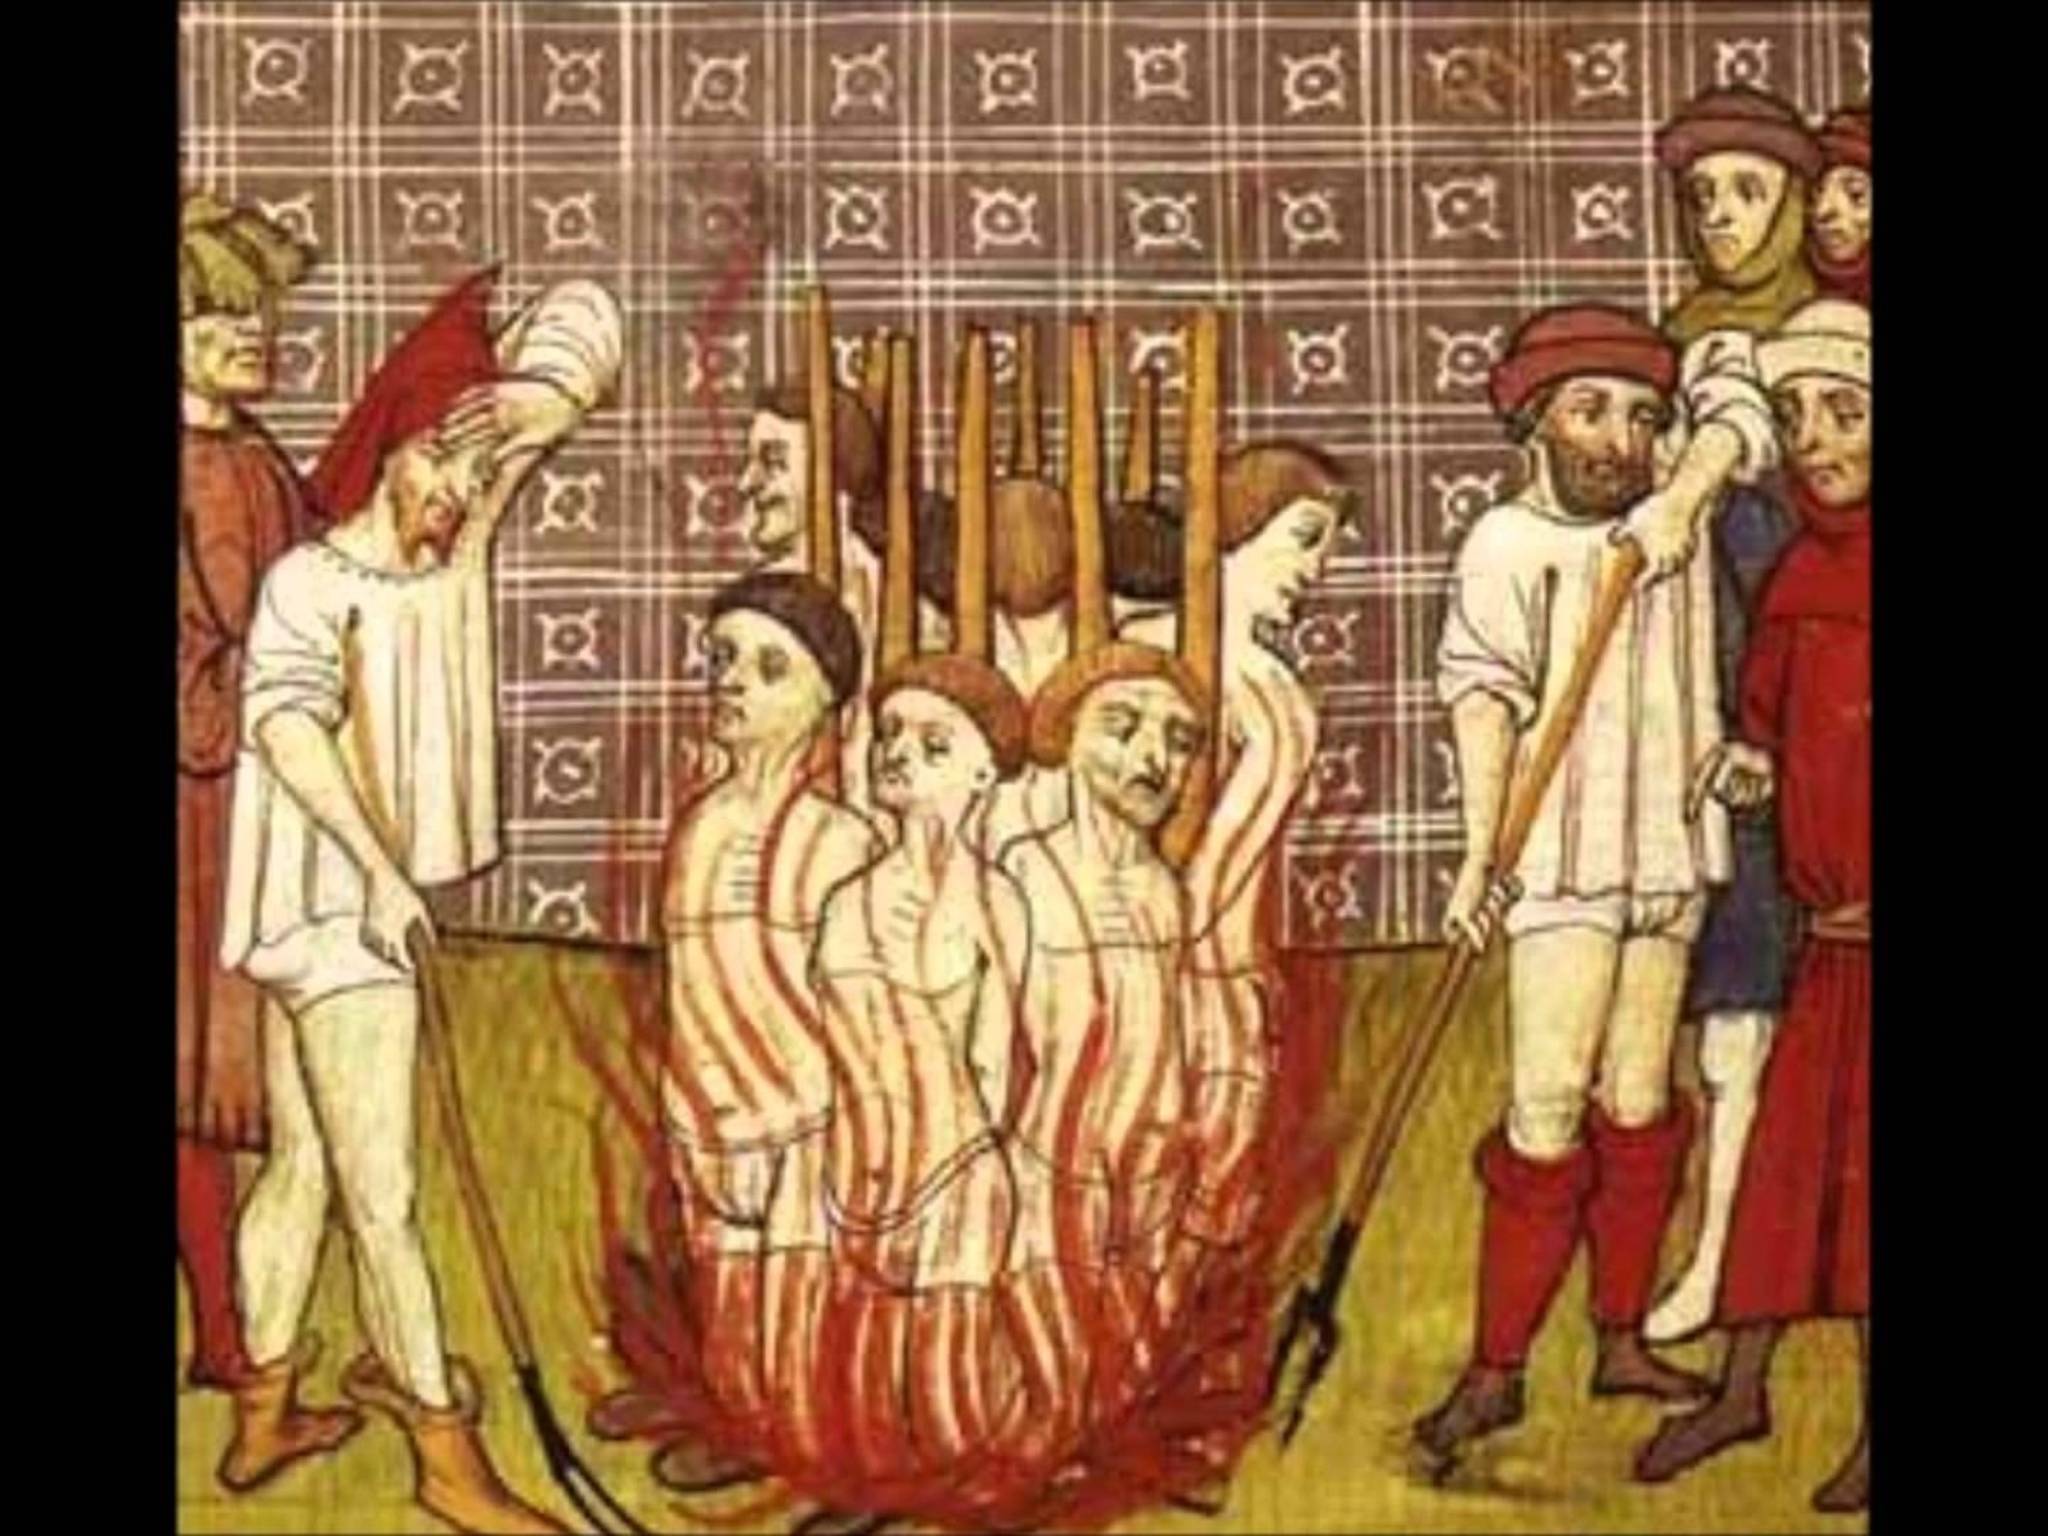 The Inquisition: Heresy and Law in the Middle Ages